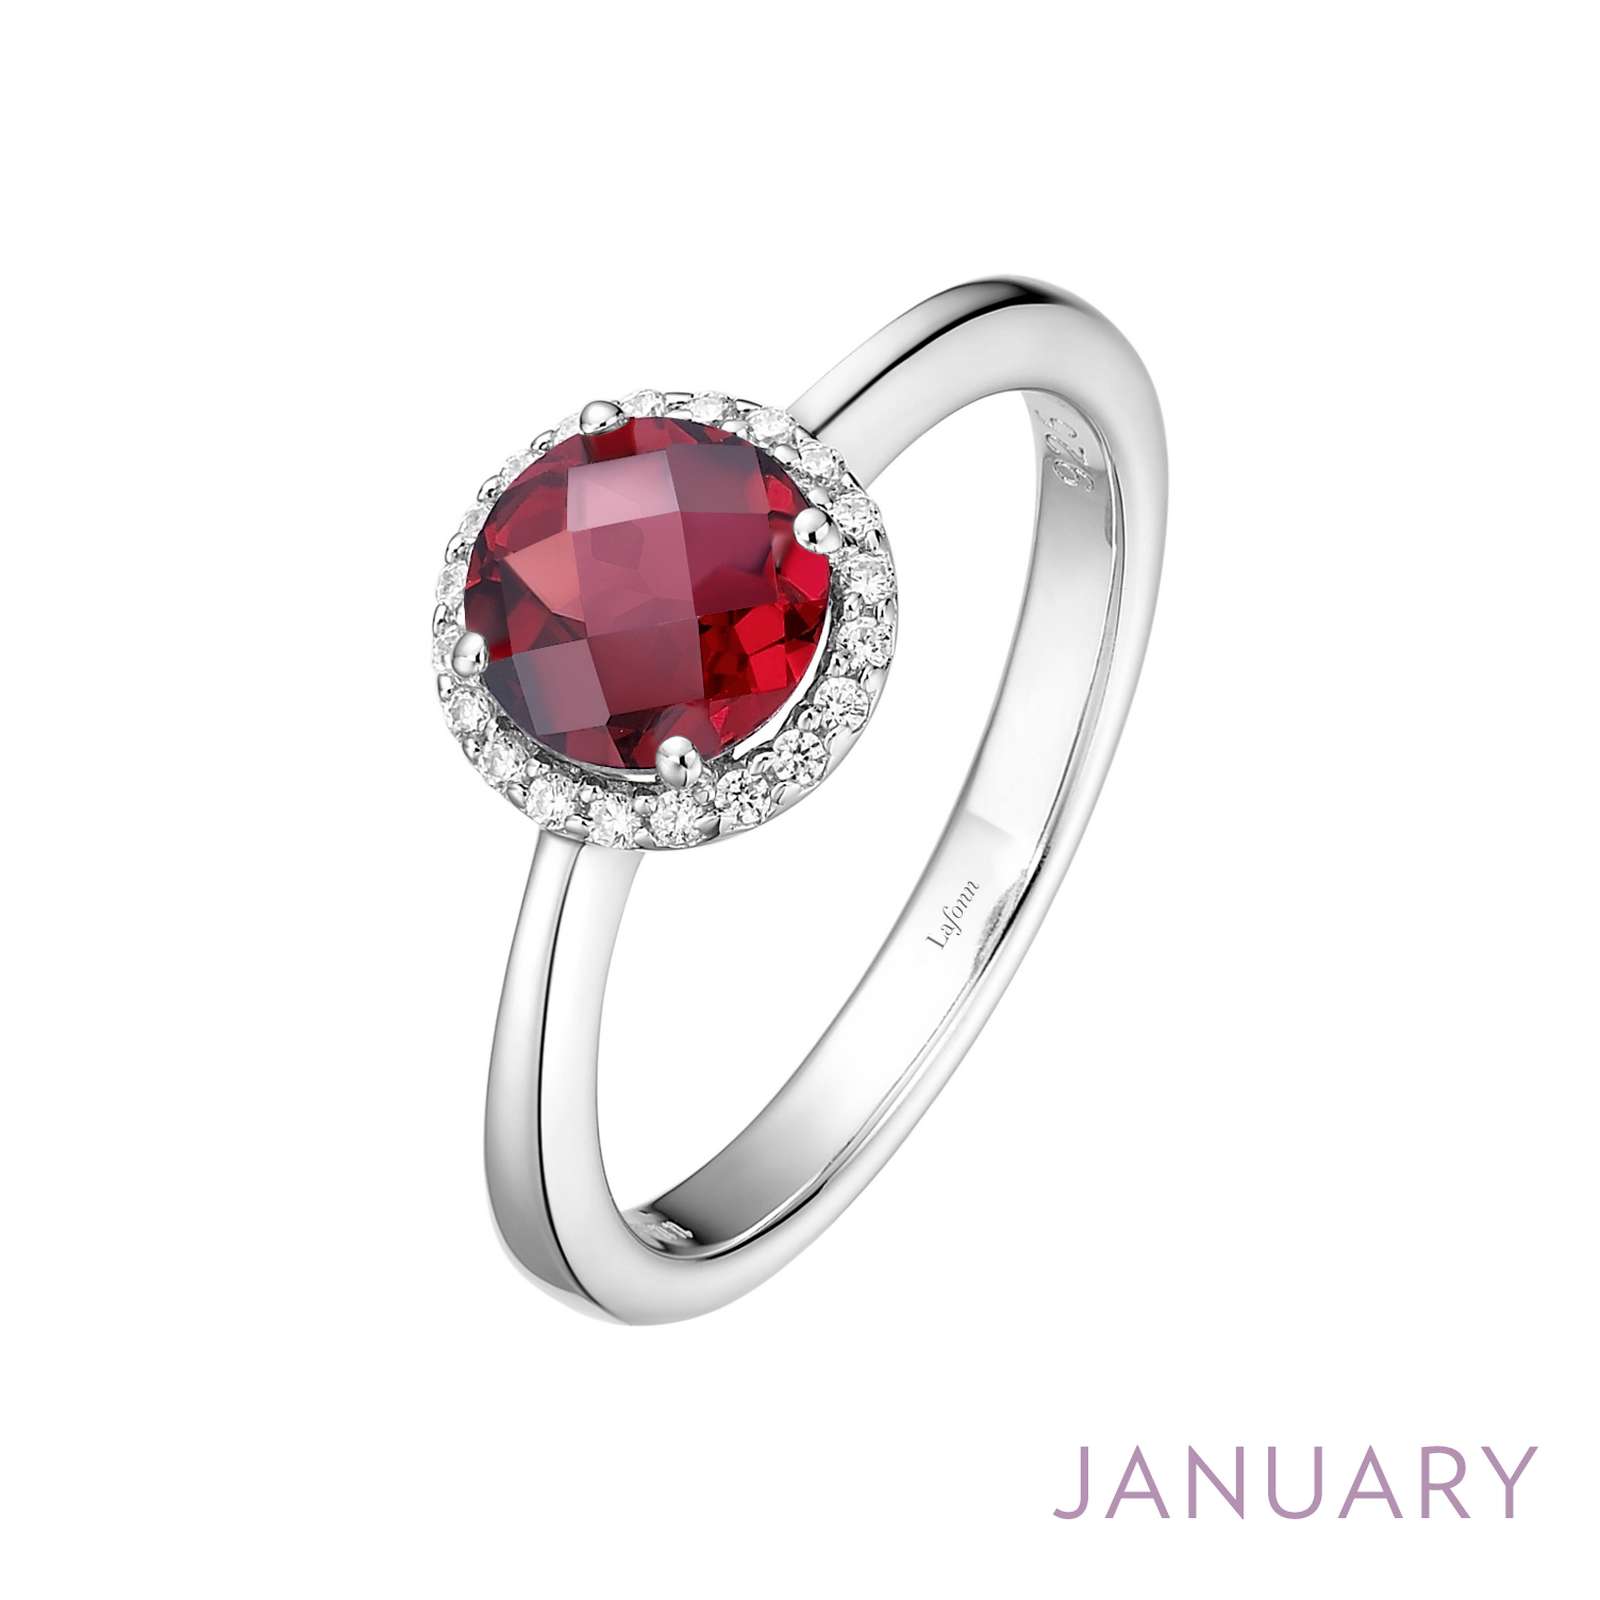 January Birthstone Ring Griner Jewelry Co. Moultrie, GA